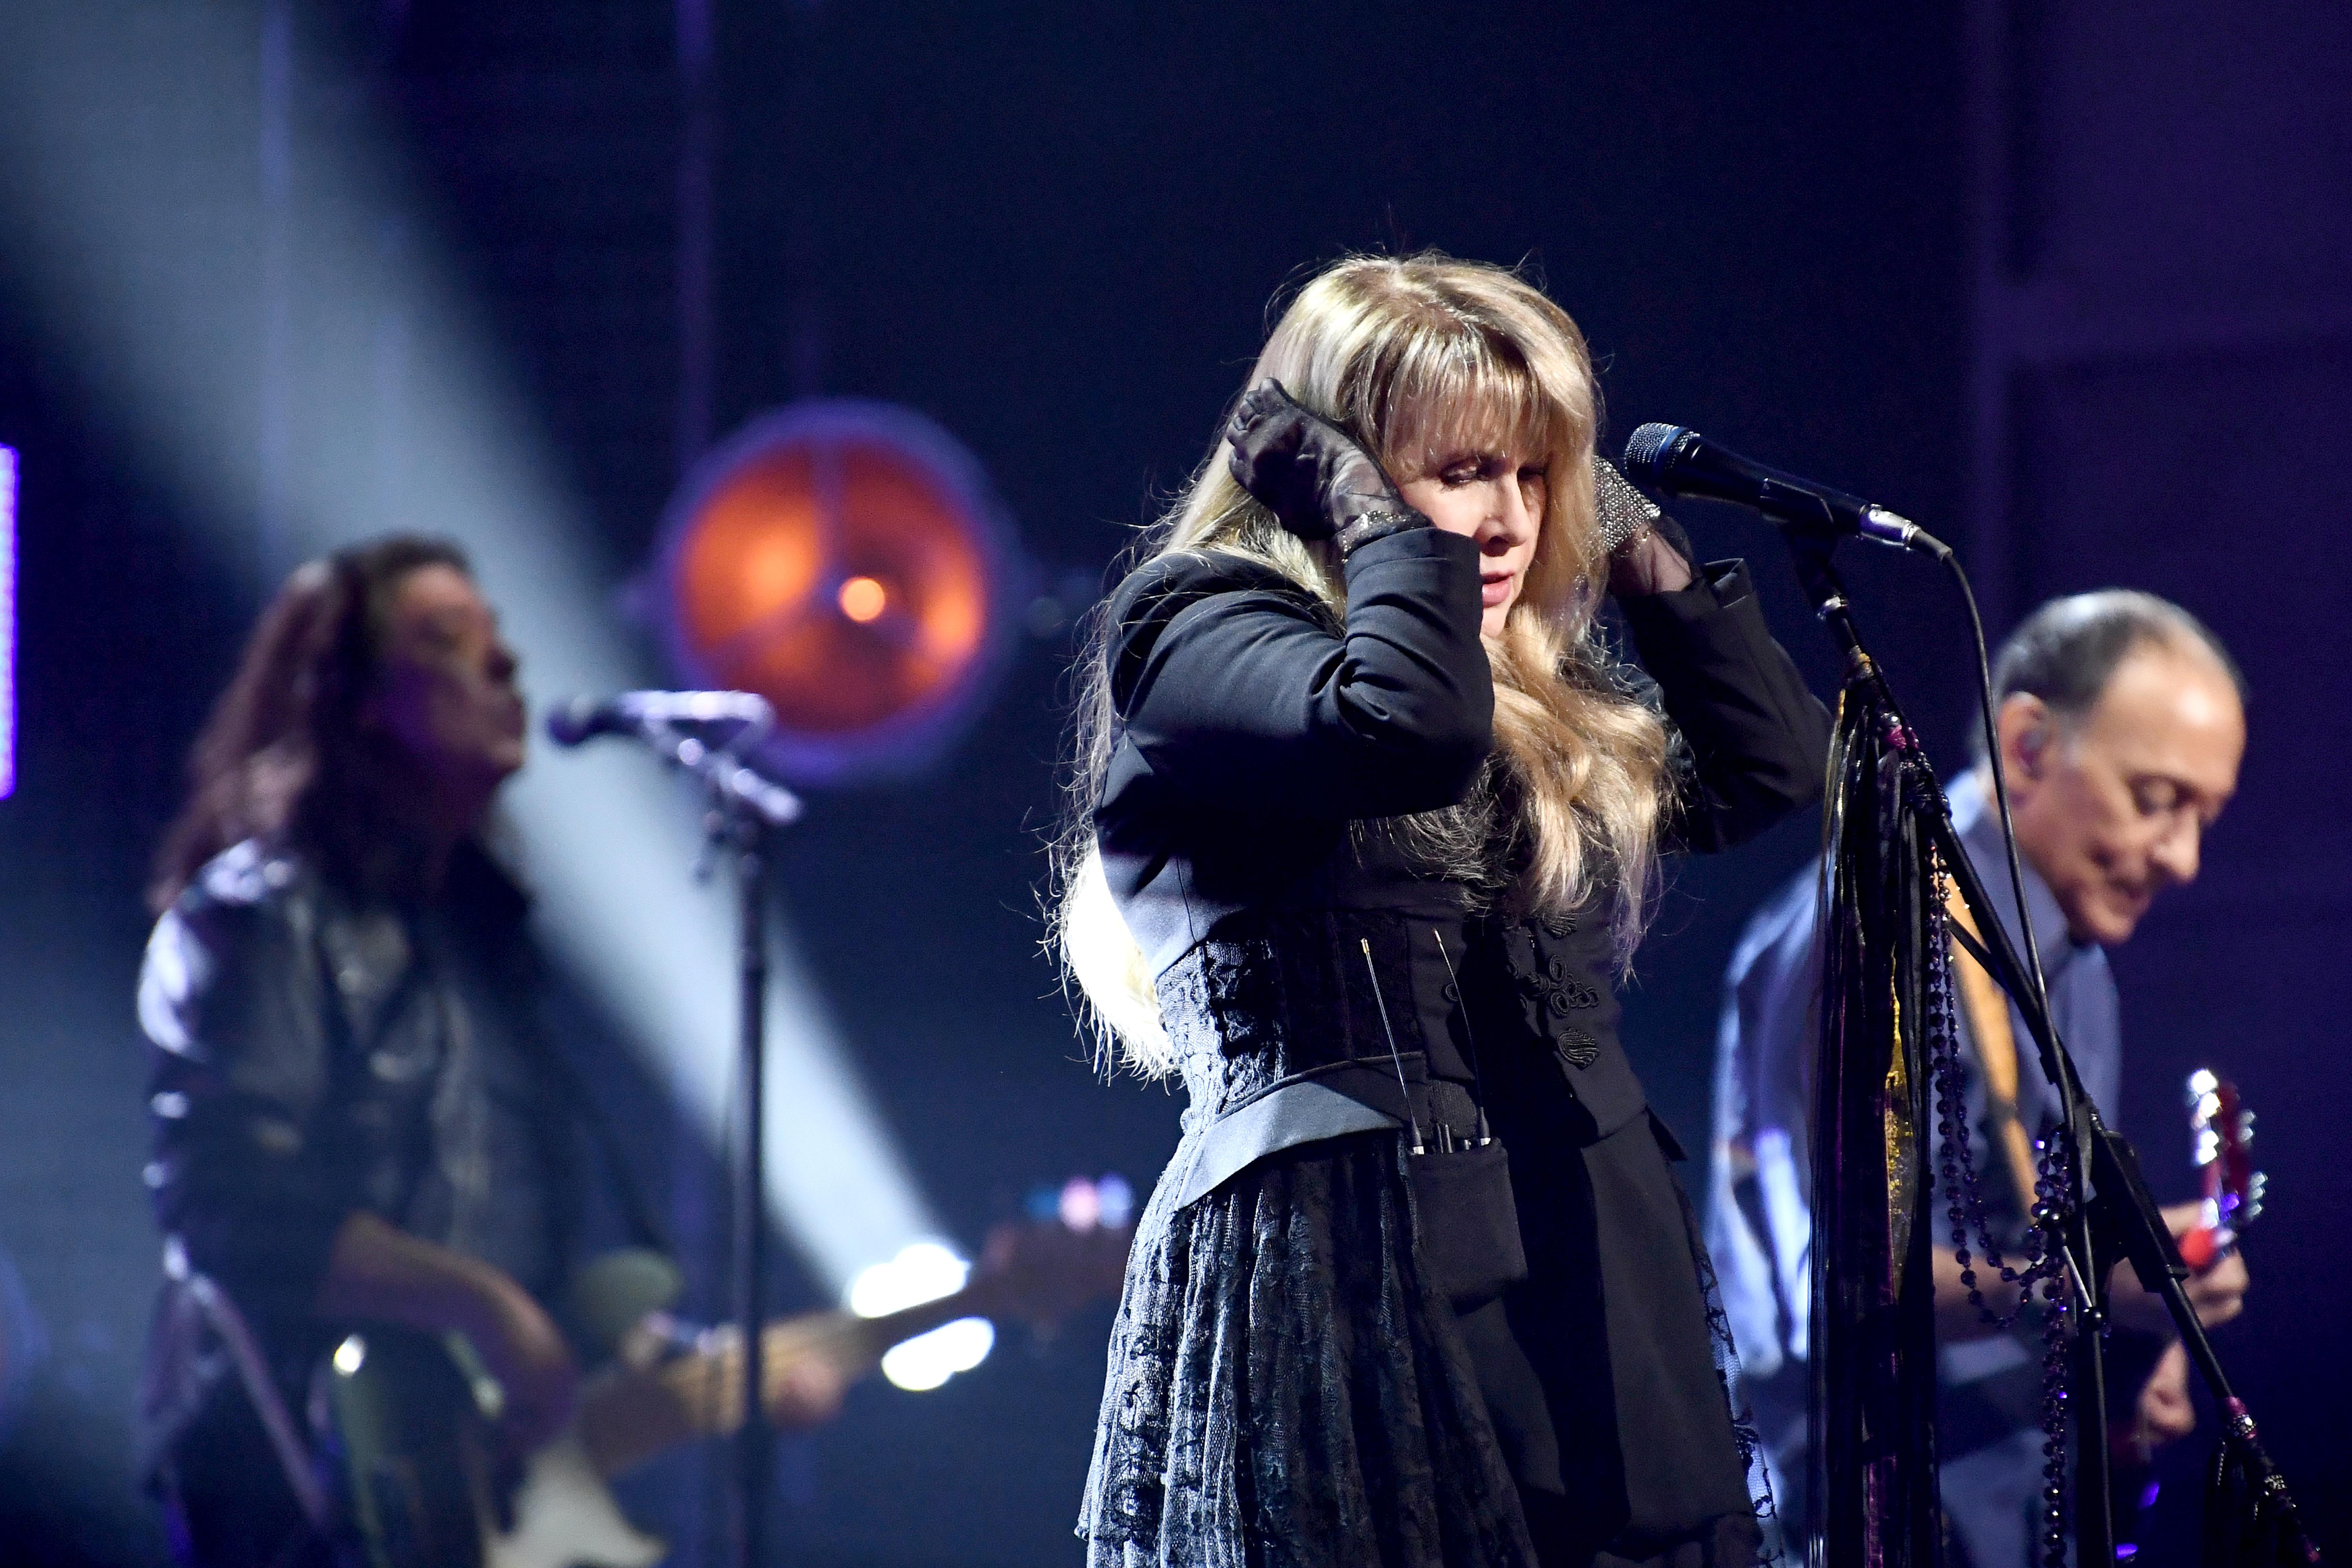 A singer puts her hand on her head while singing. Two male guitarists are shown blurry in the background of the image.